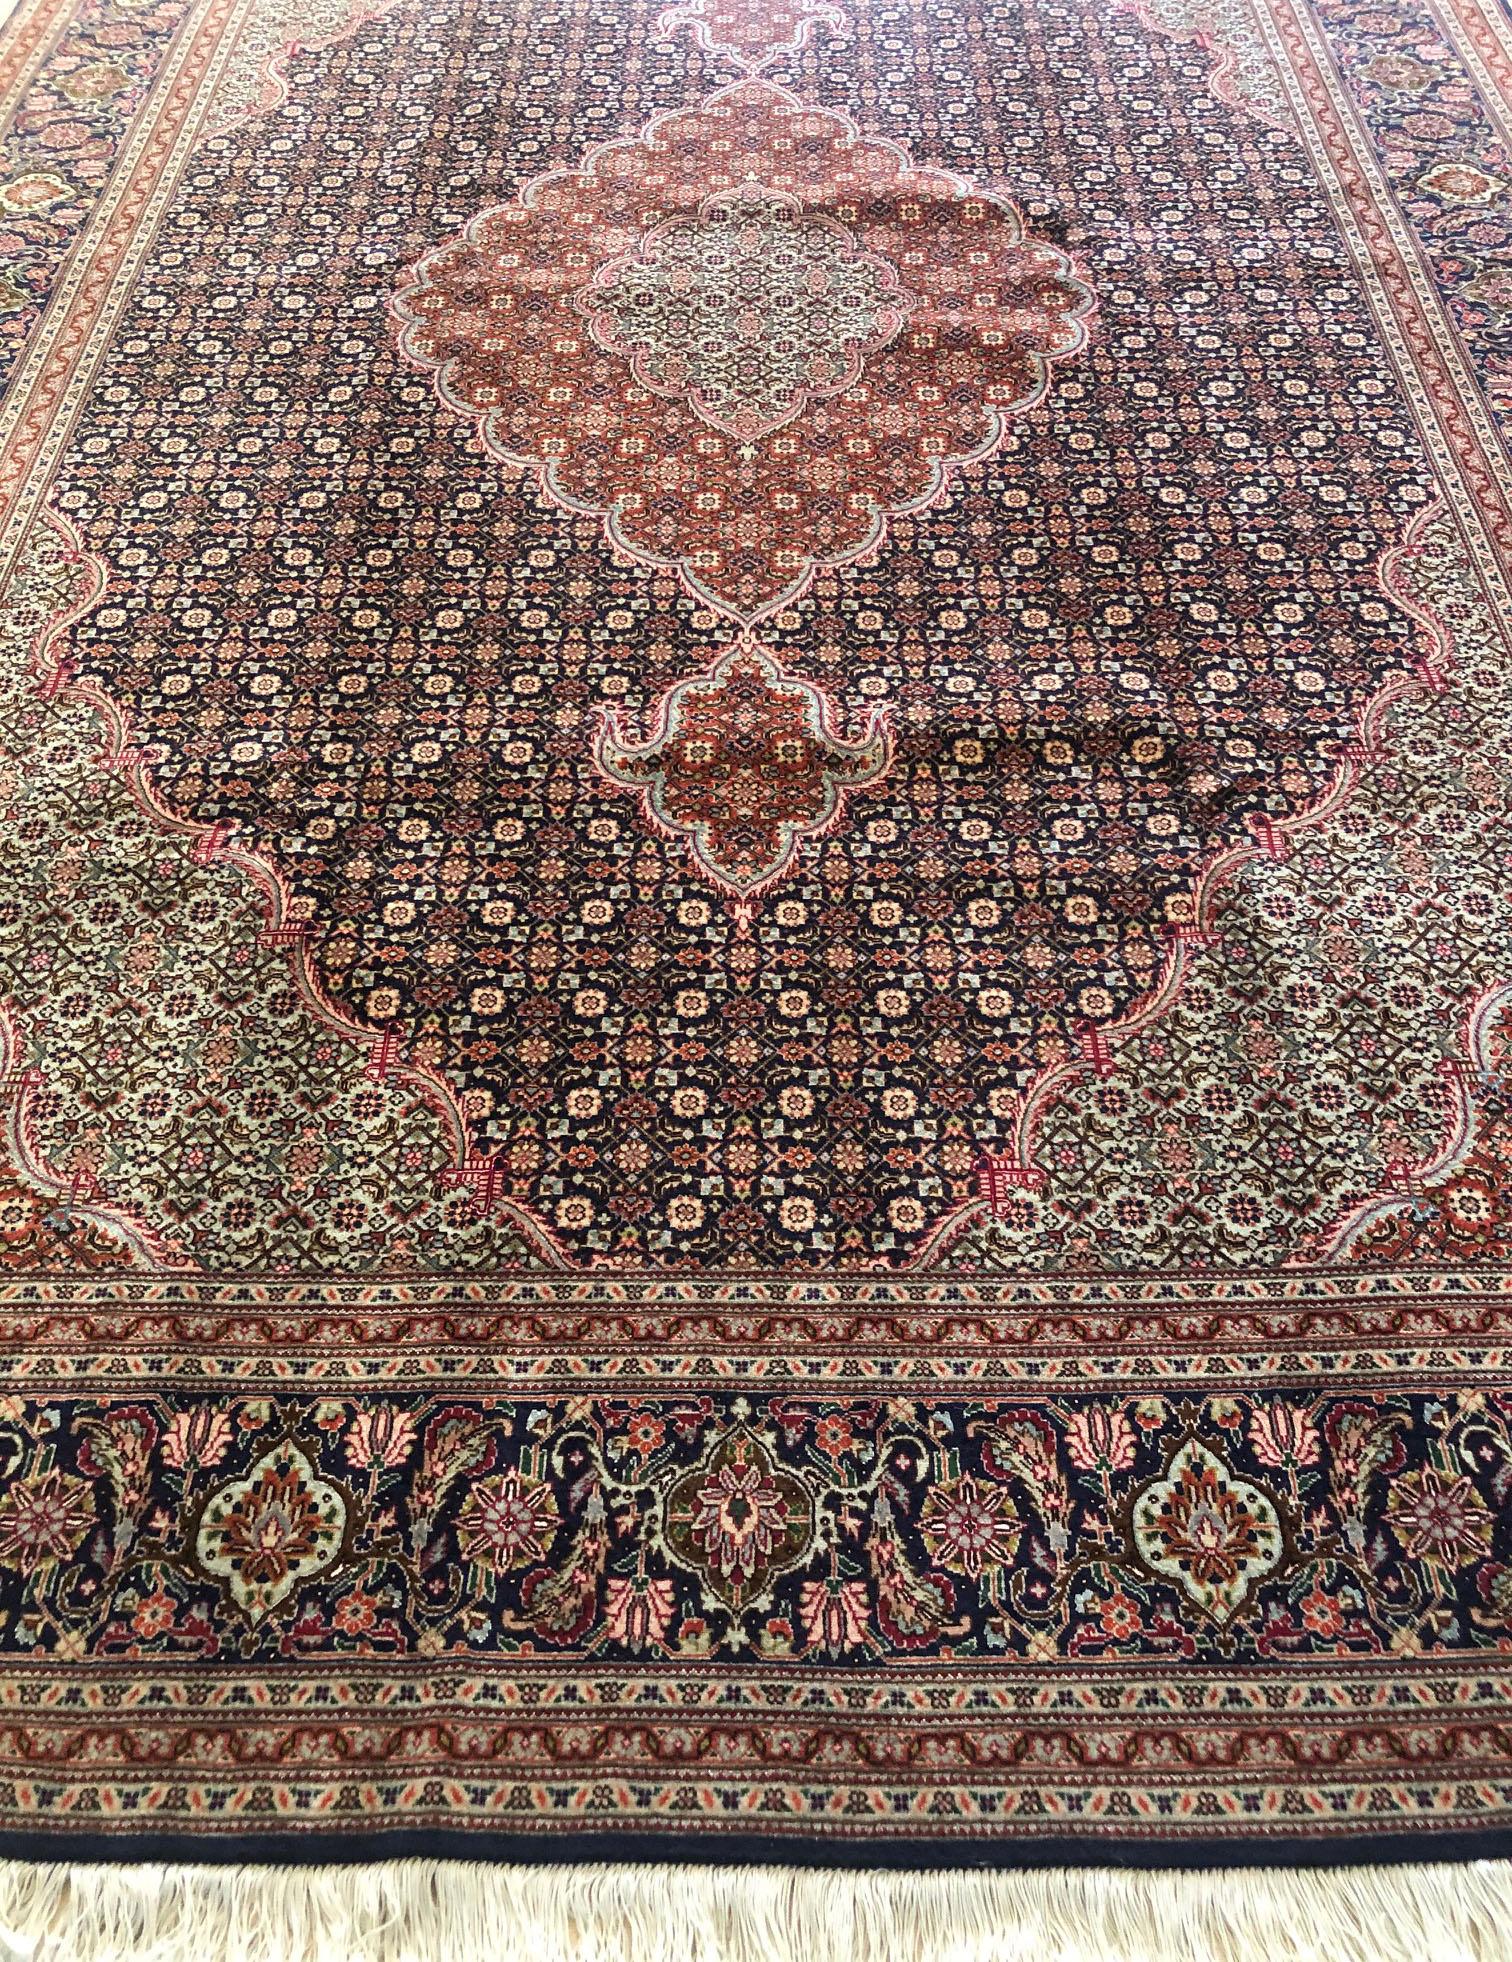 Tabriz rugs are well known for their excellent weaving and design. One of the very famous patterns of Tabriz rugs are Fish Design known is Mahi. This beautiful piece has wool and silk pile with cotton foundation. Mahi rugs are not only one of the